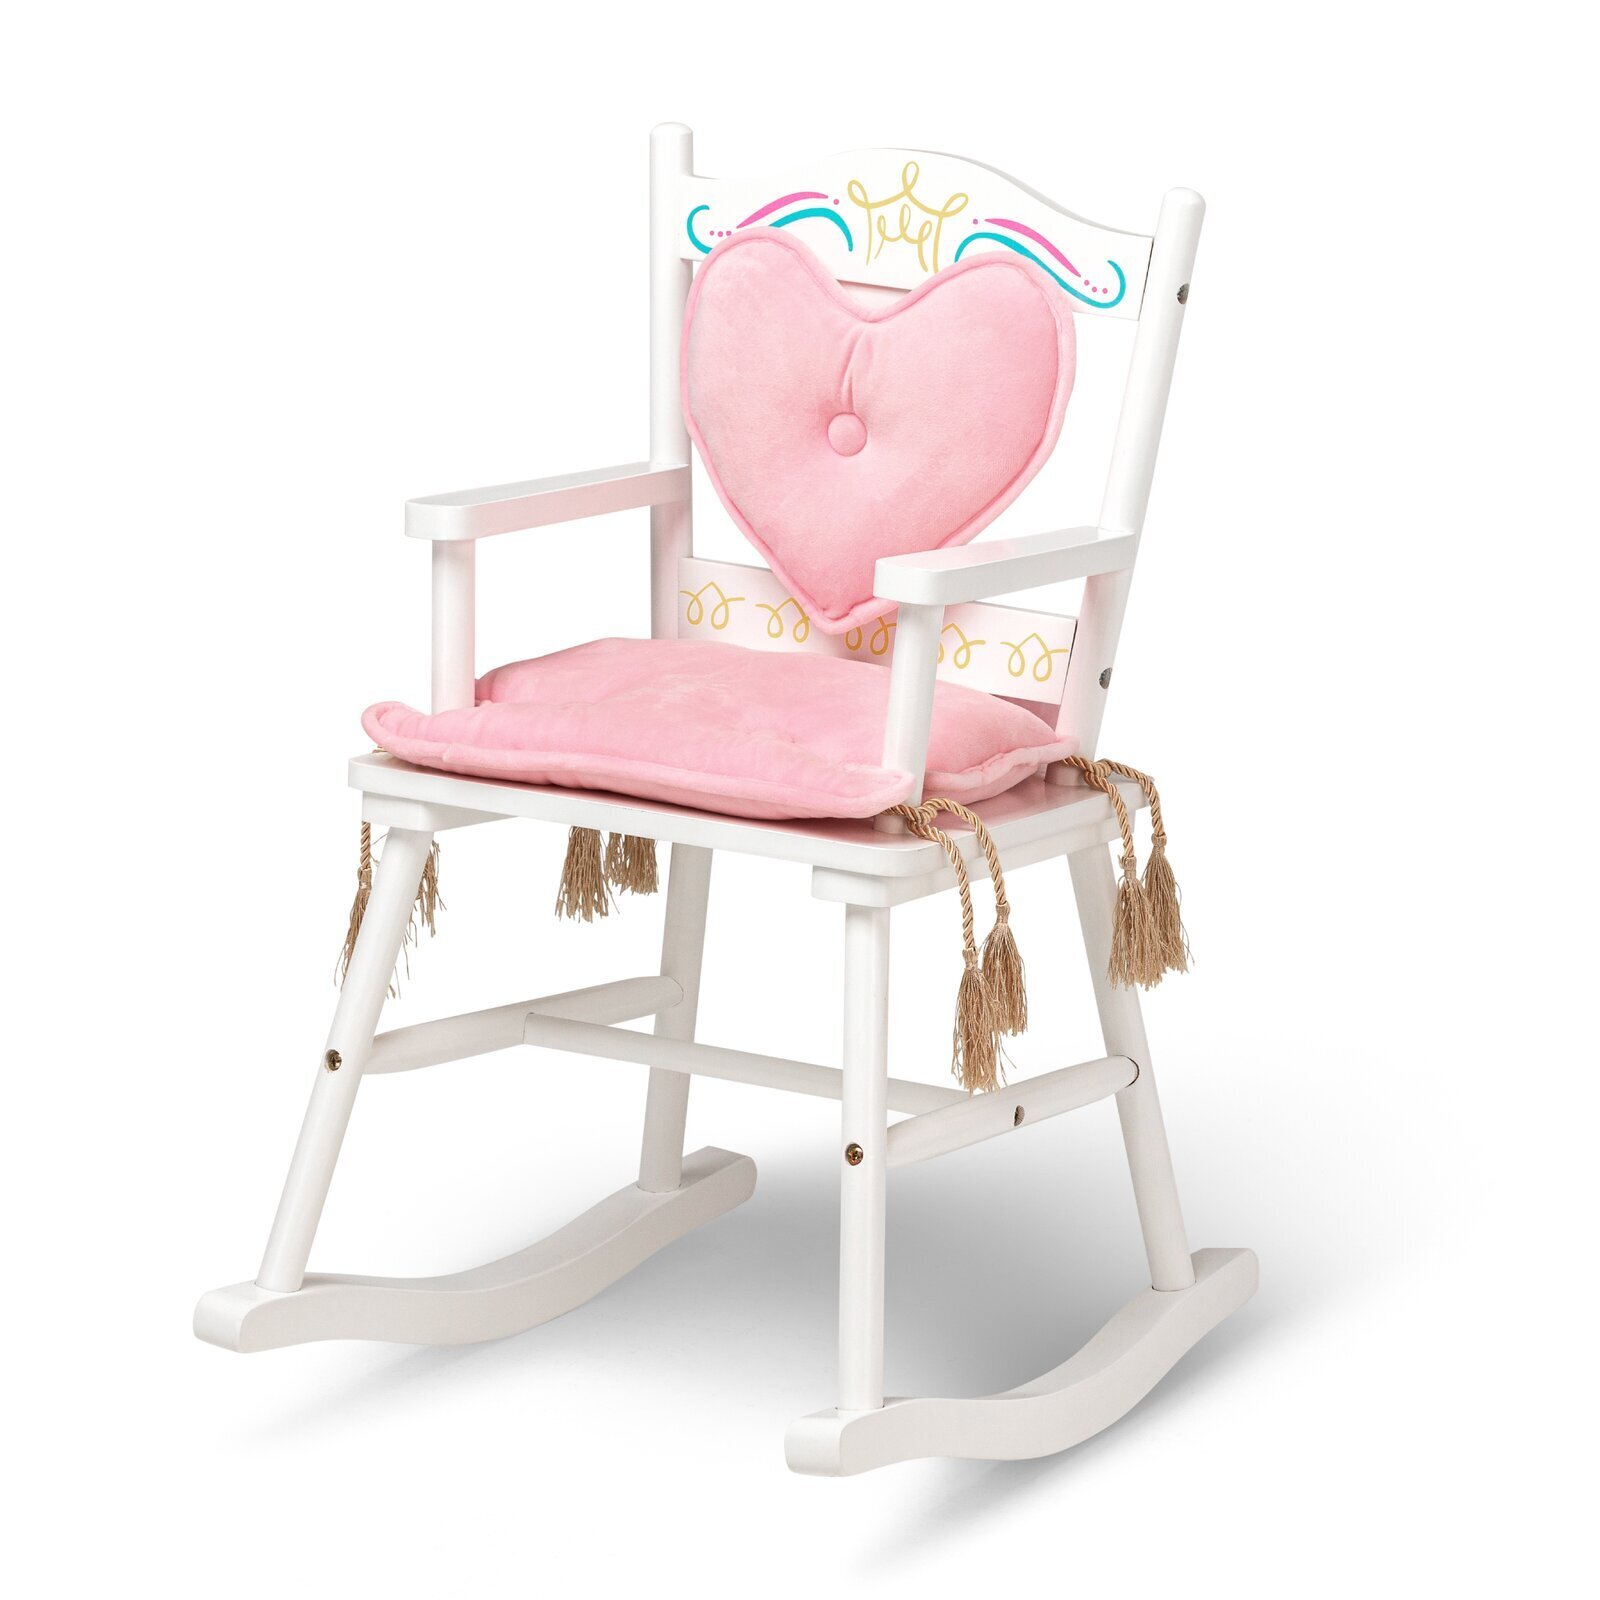 Suitable for 1 to 4 Years Old Blessing2220 Classic Kids Rocking Chair Pink Indoor or Outdoor Porch Rocker Wood 